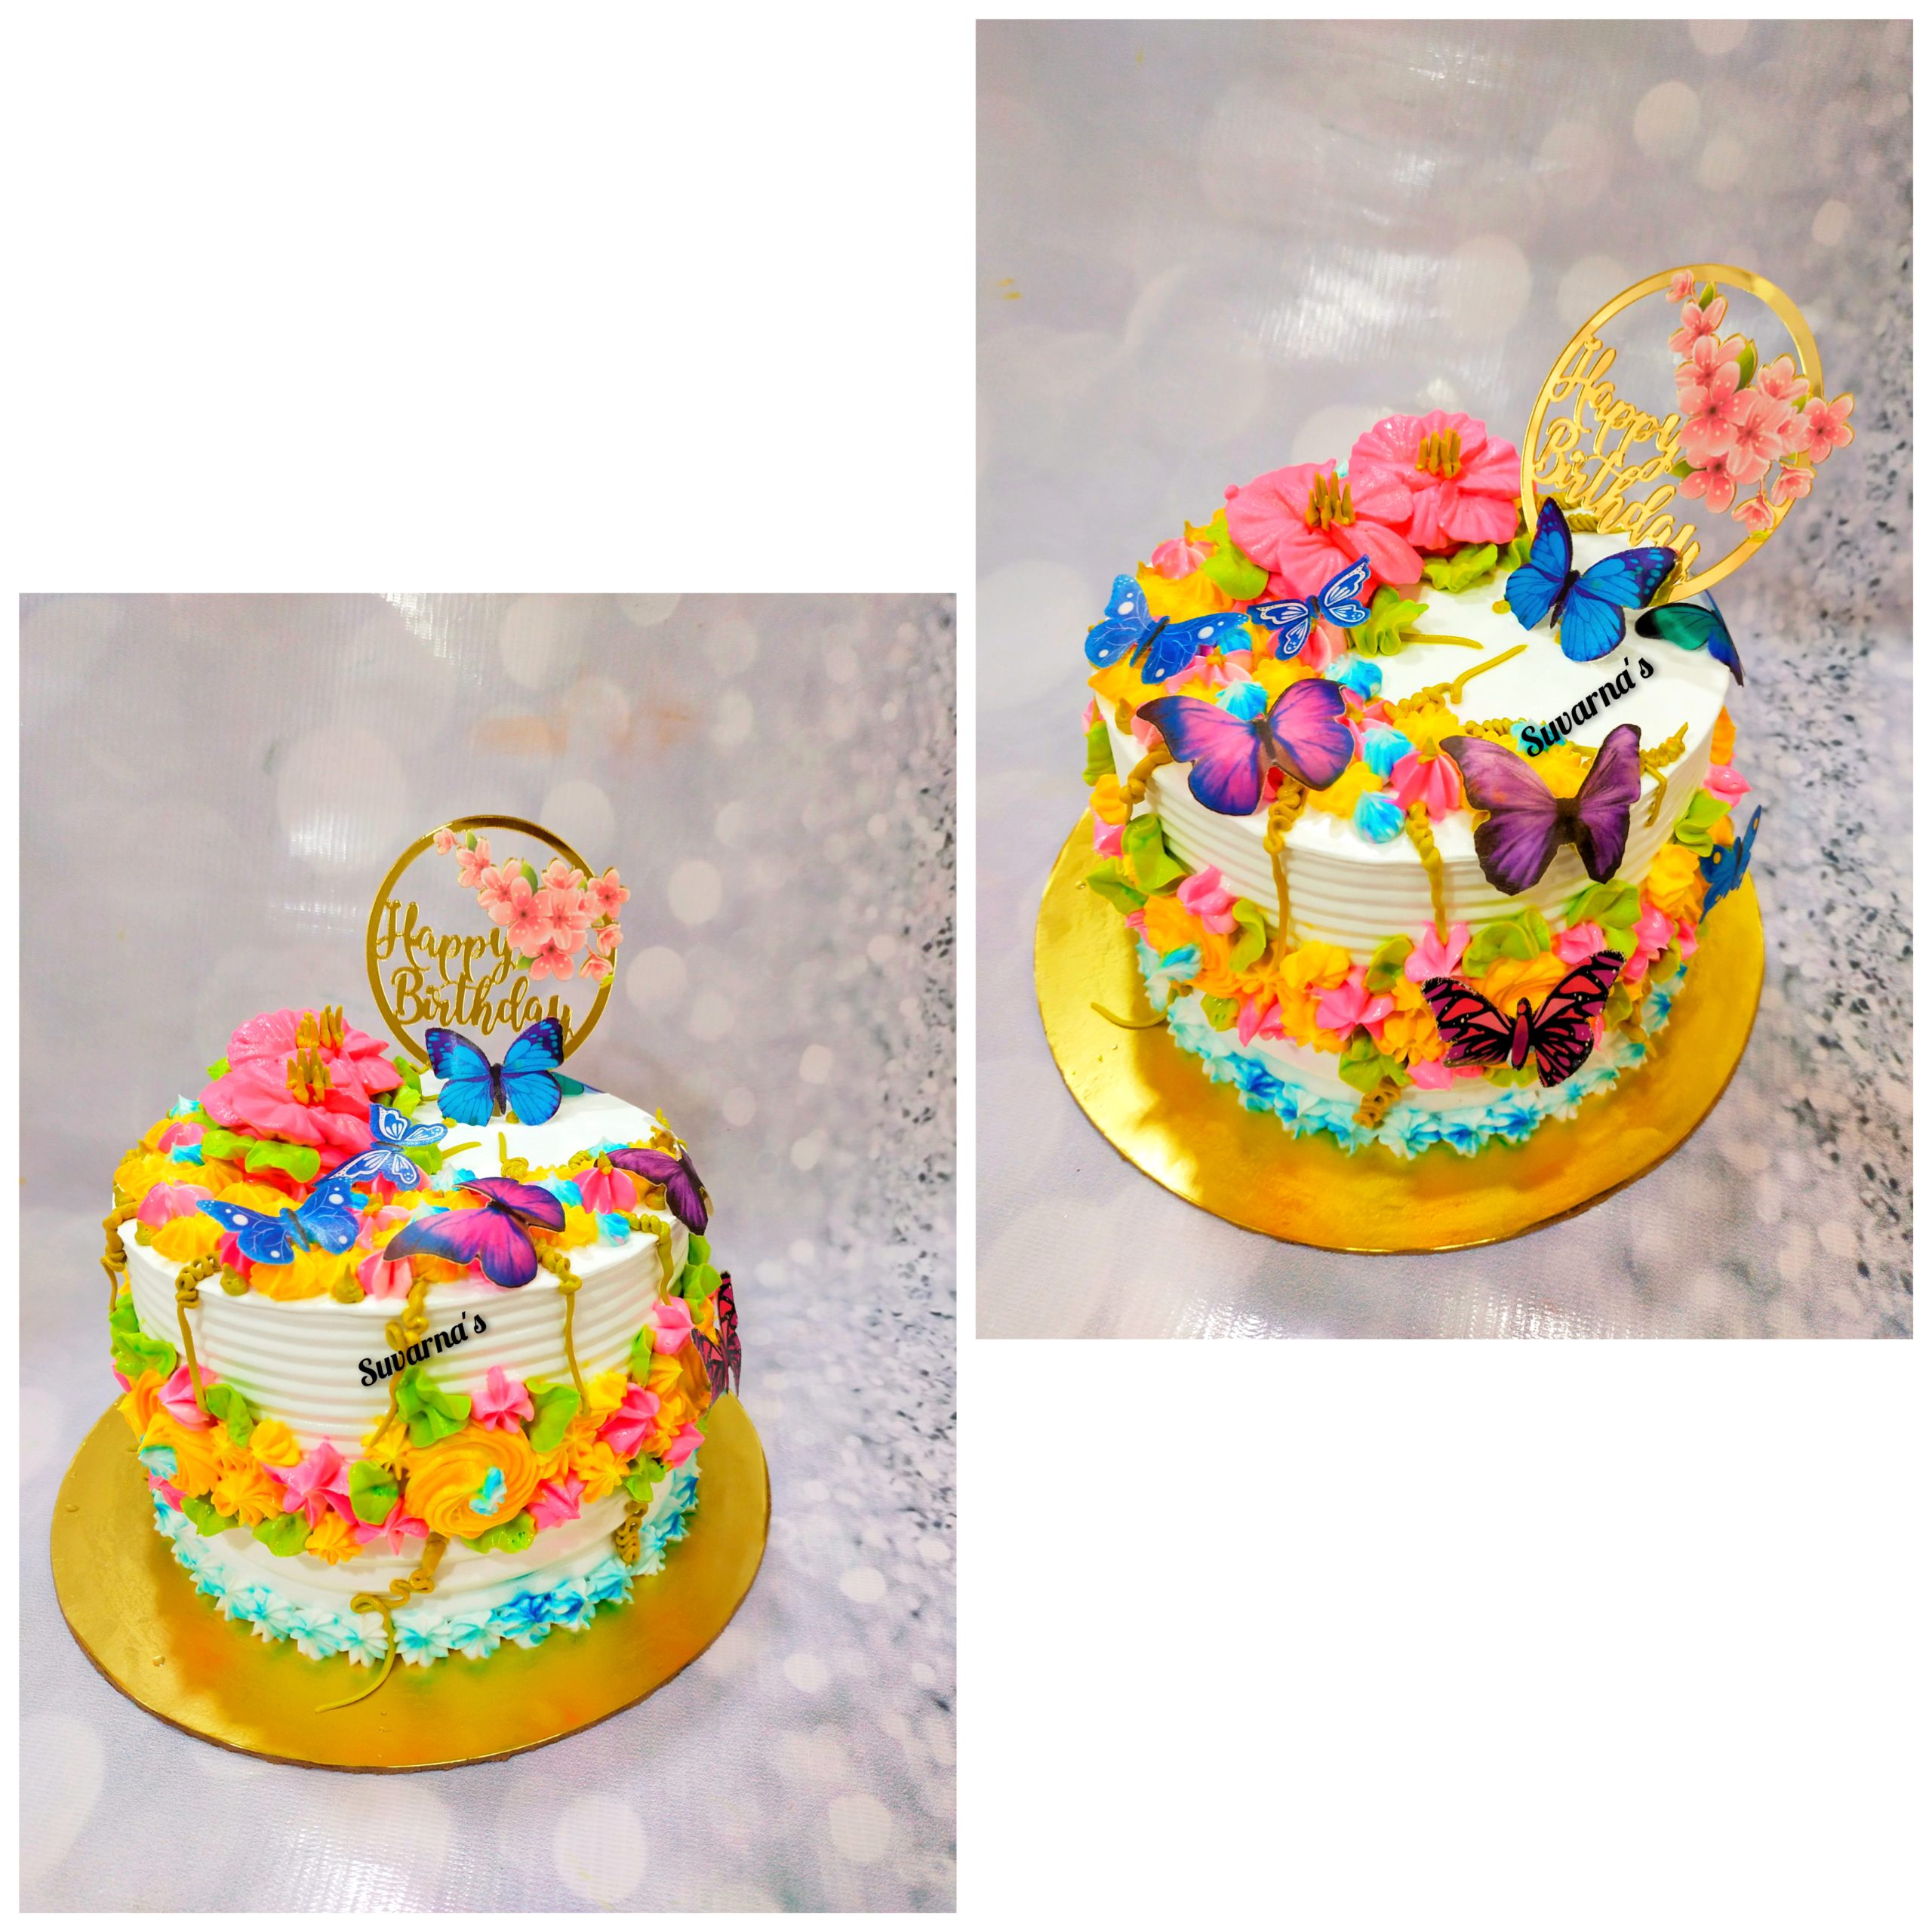 Butterfly 🦋 Birthday cake Designs, Images, Price Near Me